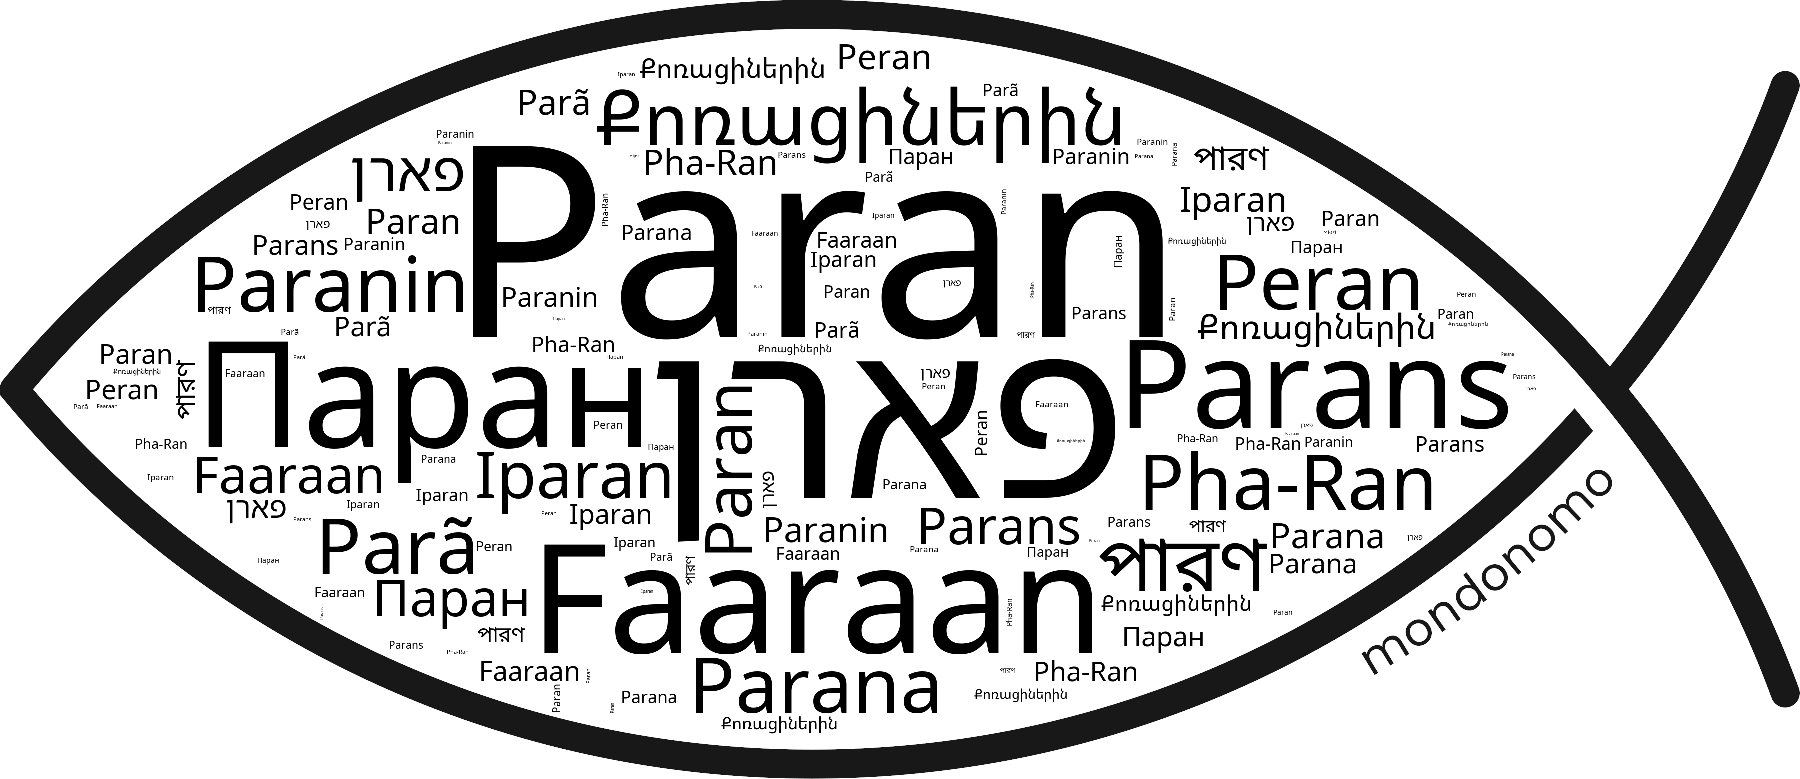 Name Paran in the world's Bibles